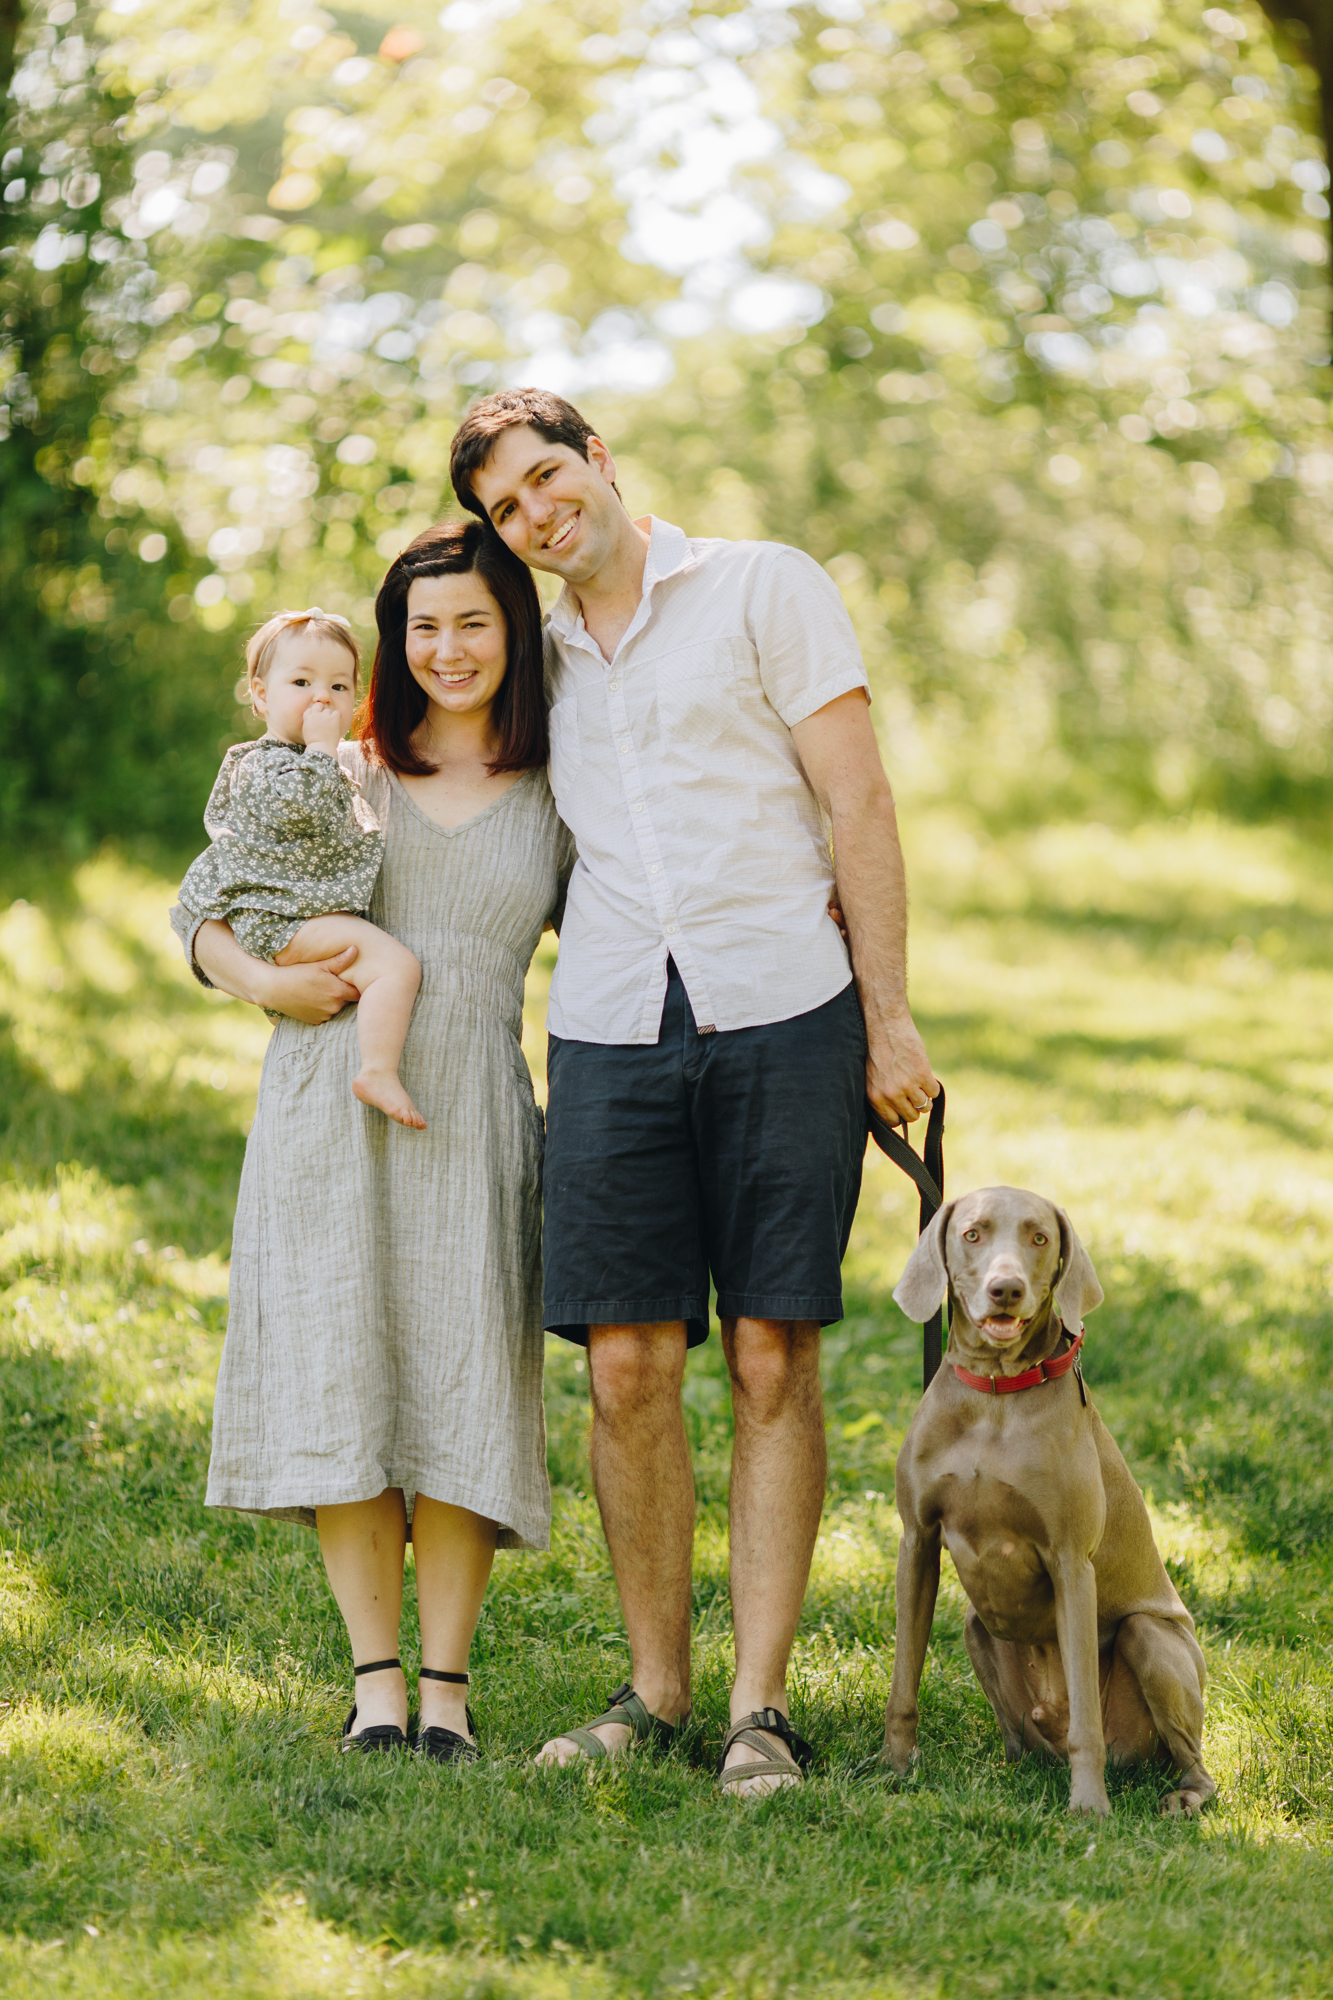 Awesome Family Shoot in Prospect Park